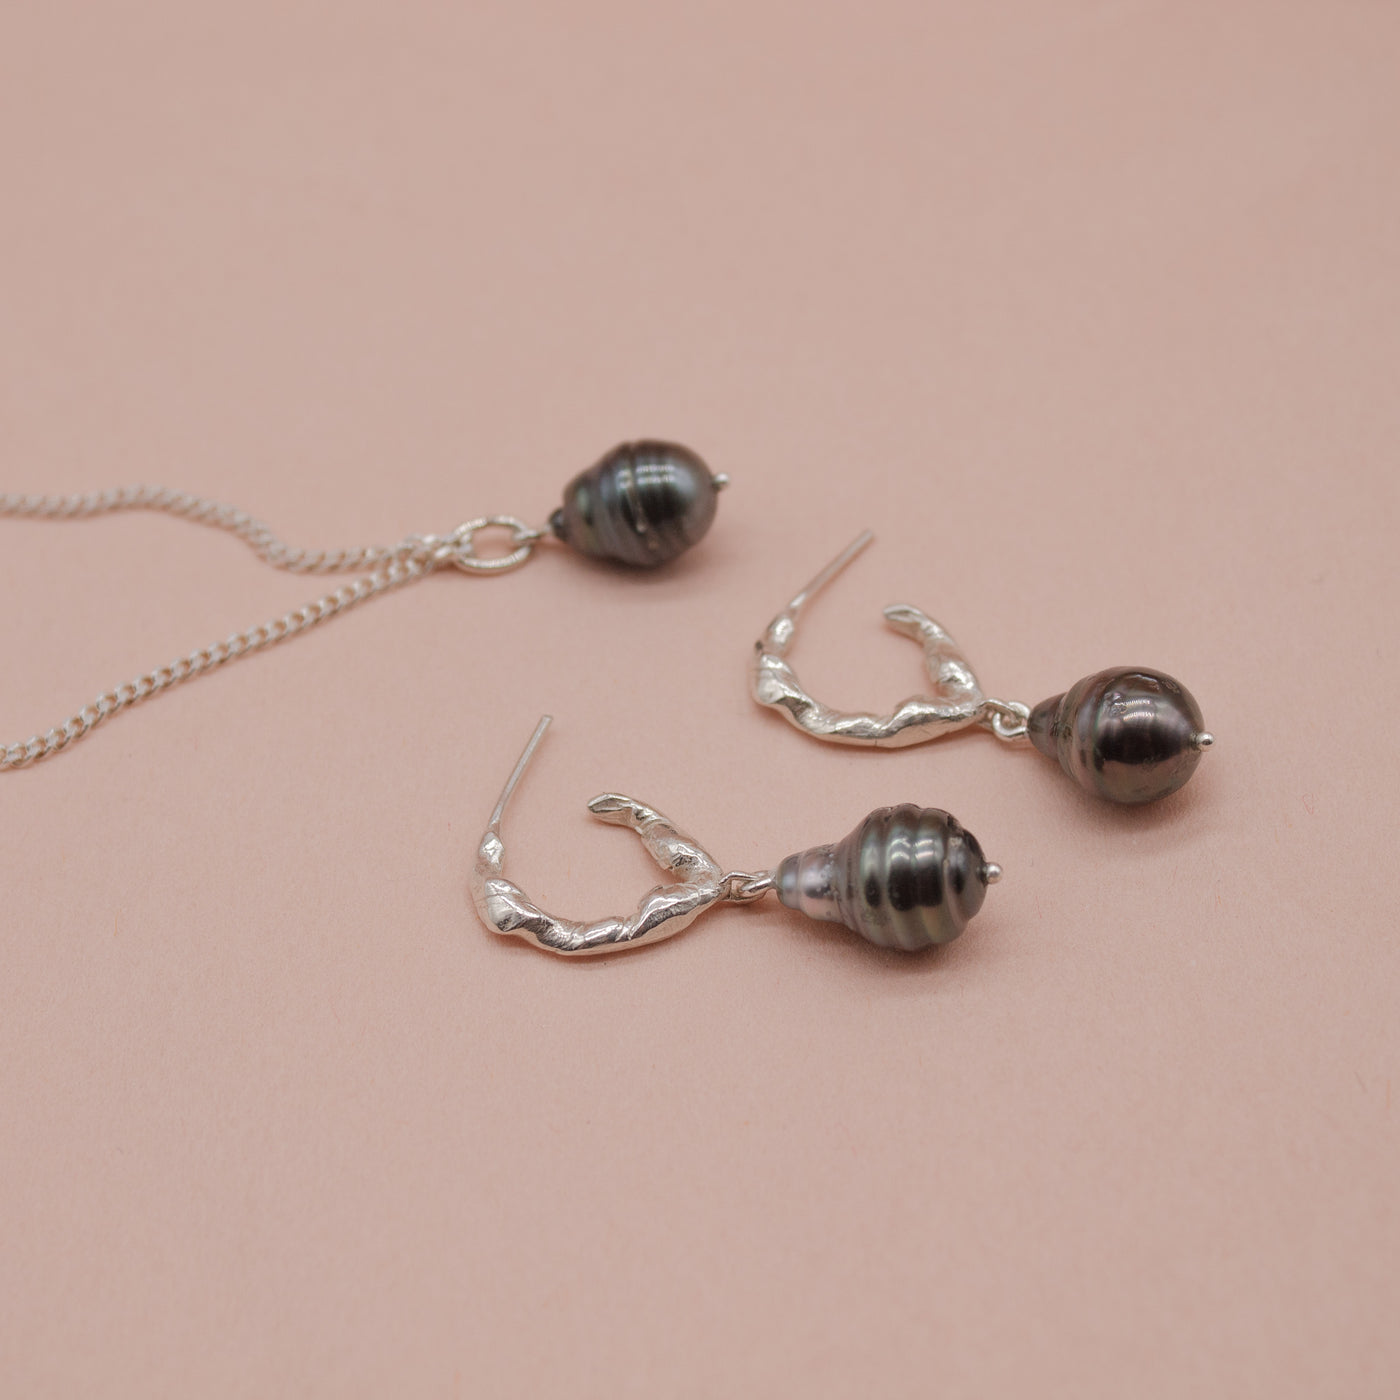 Jewelry Set // SANDEFJORD Earrings x NYTORP Necklace Silver